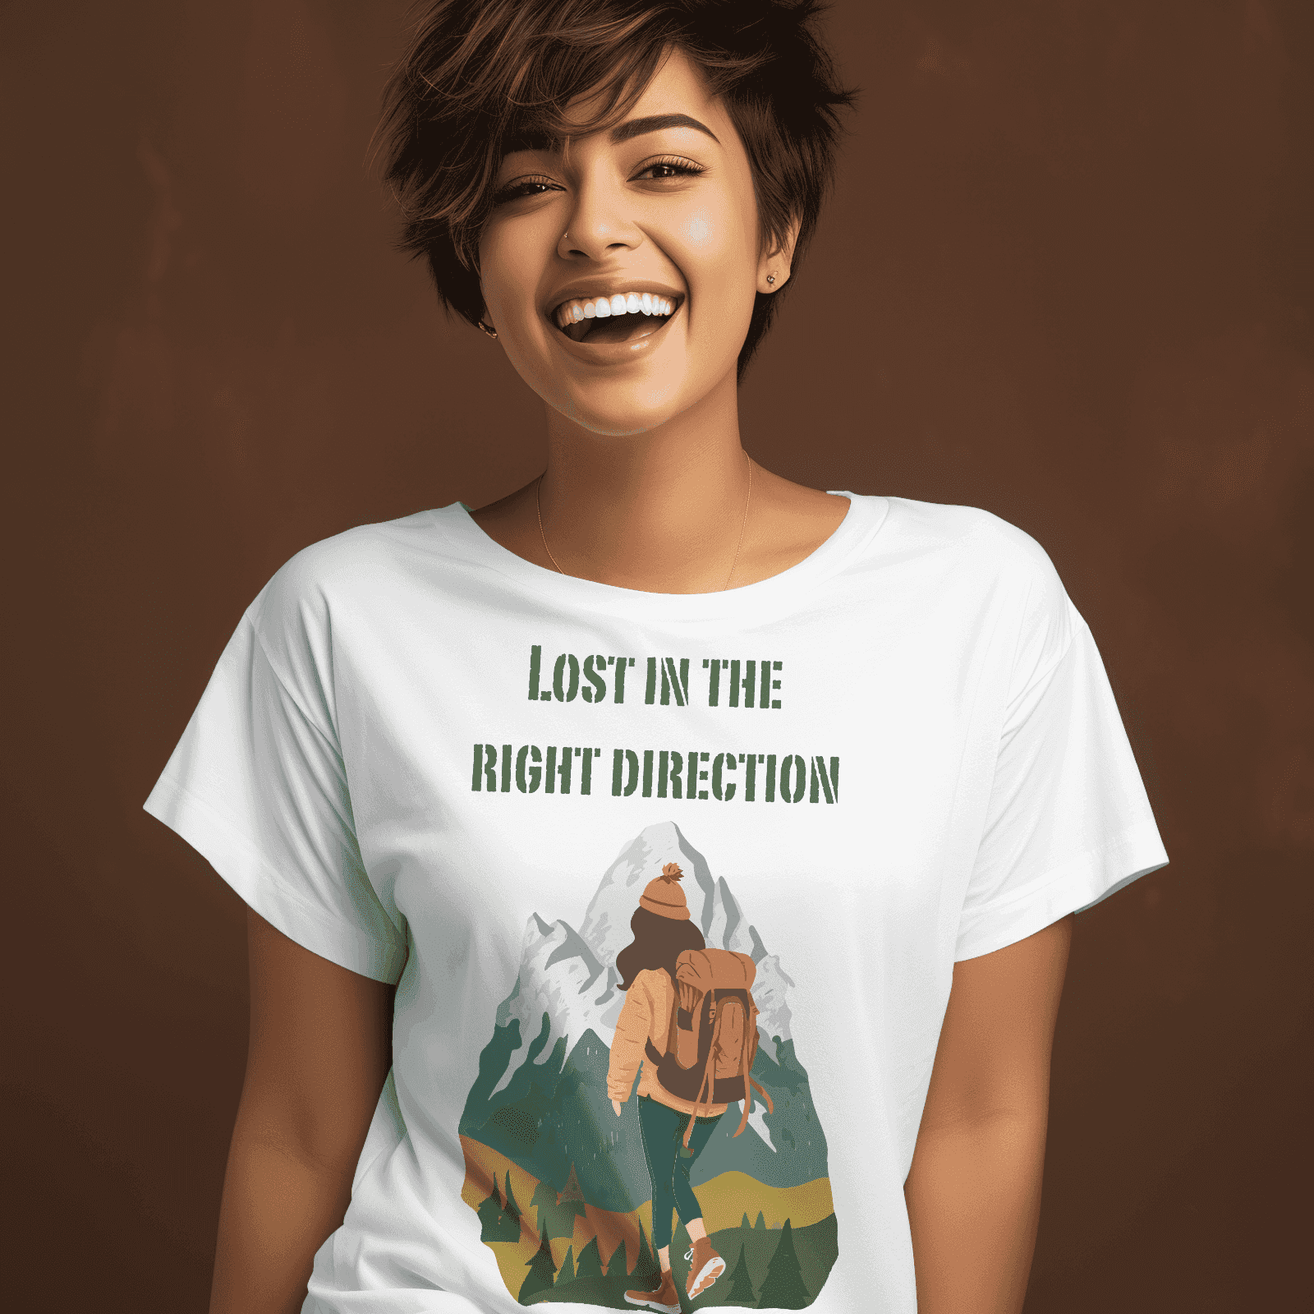 Lost in the Right Direction Women's Adventure T-Shirt - Explore the Unknown Path